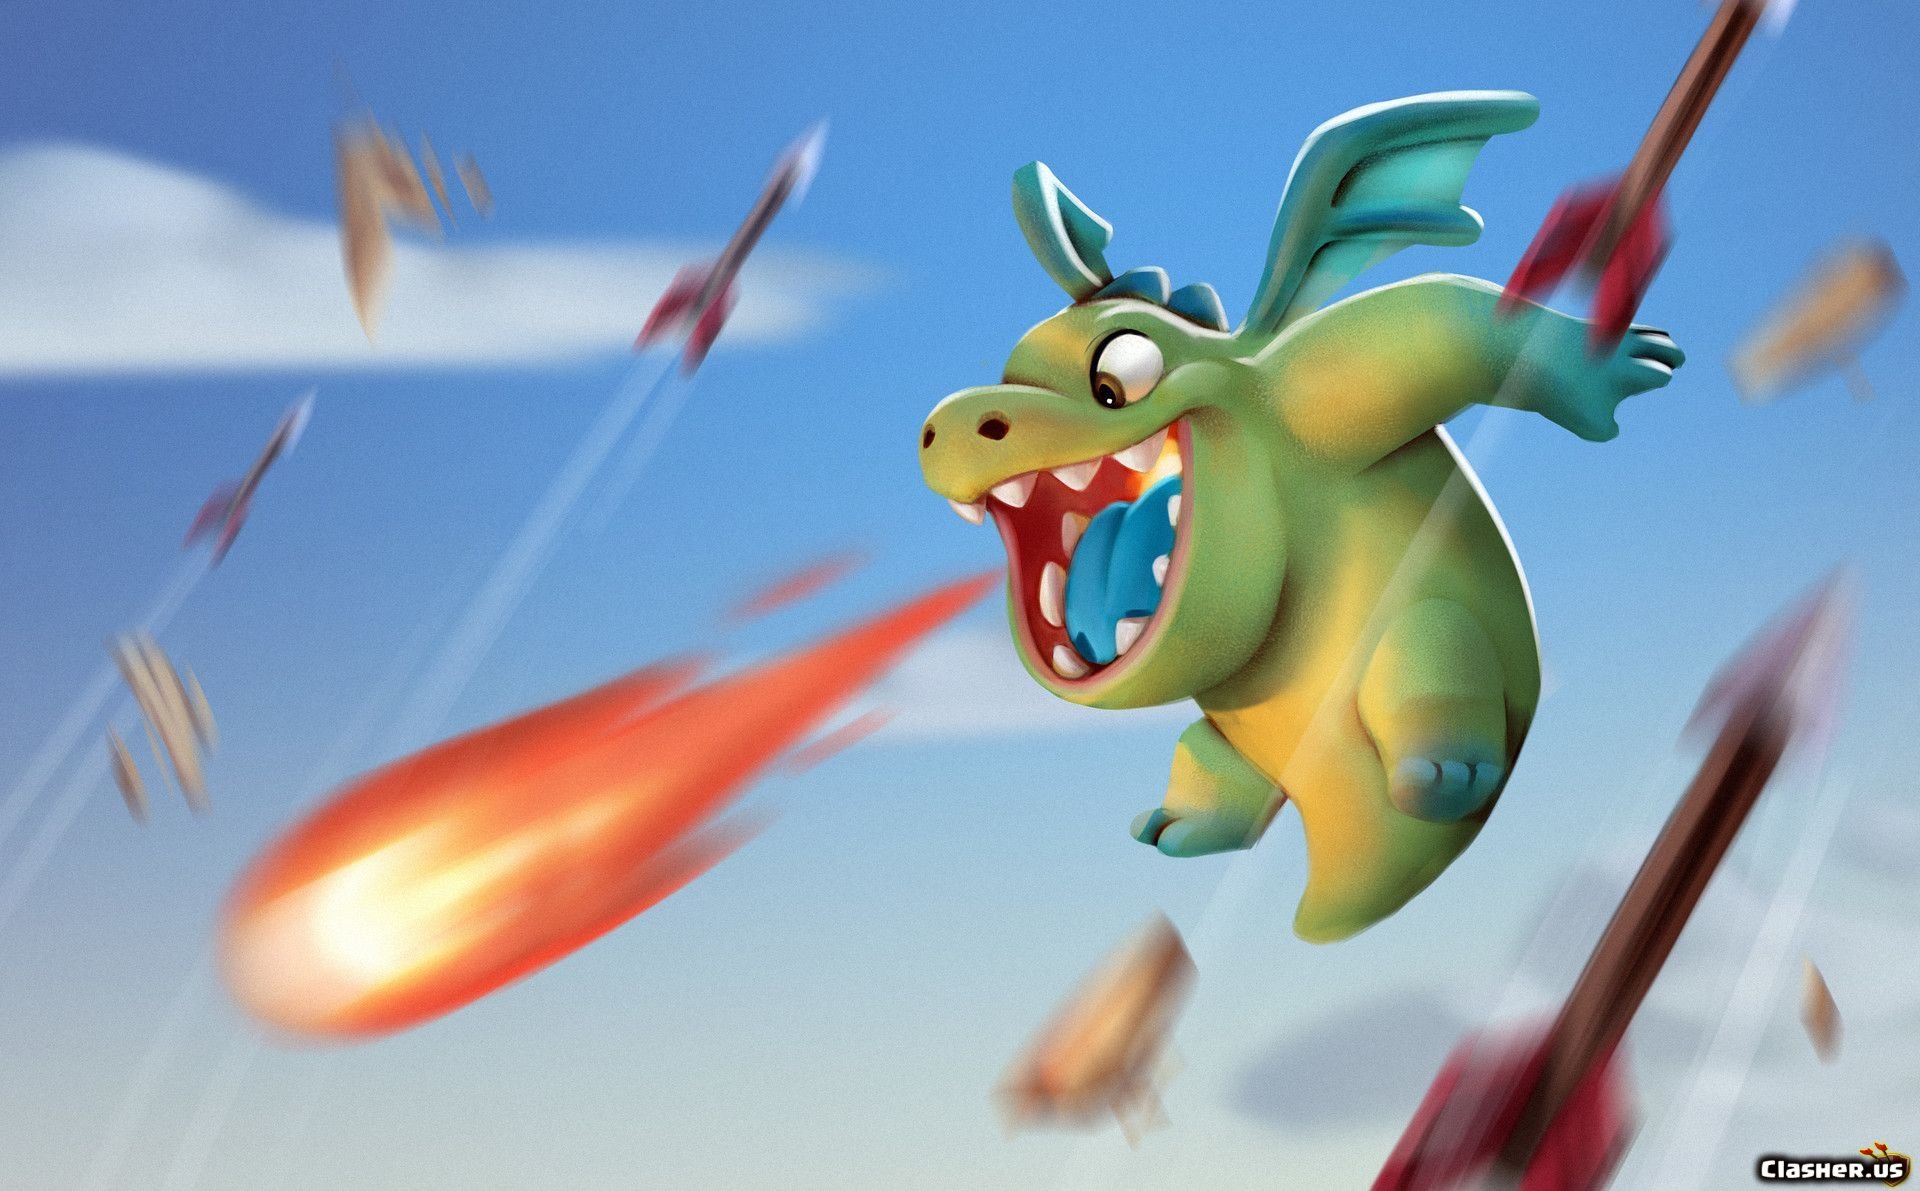 Baby Dragon fire v6   Clash of Clans Wallpapers Clasherus